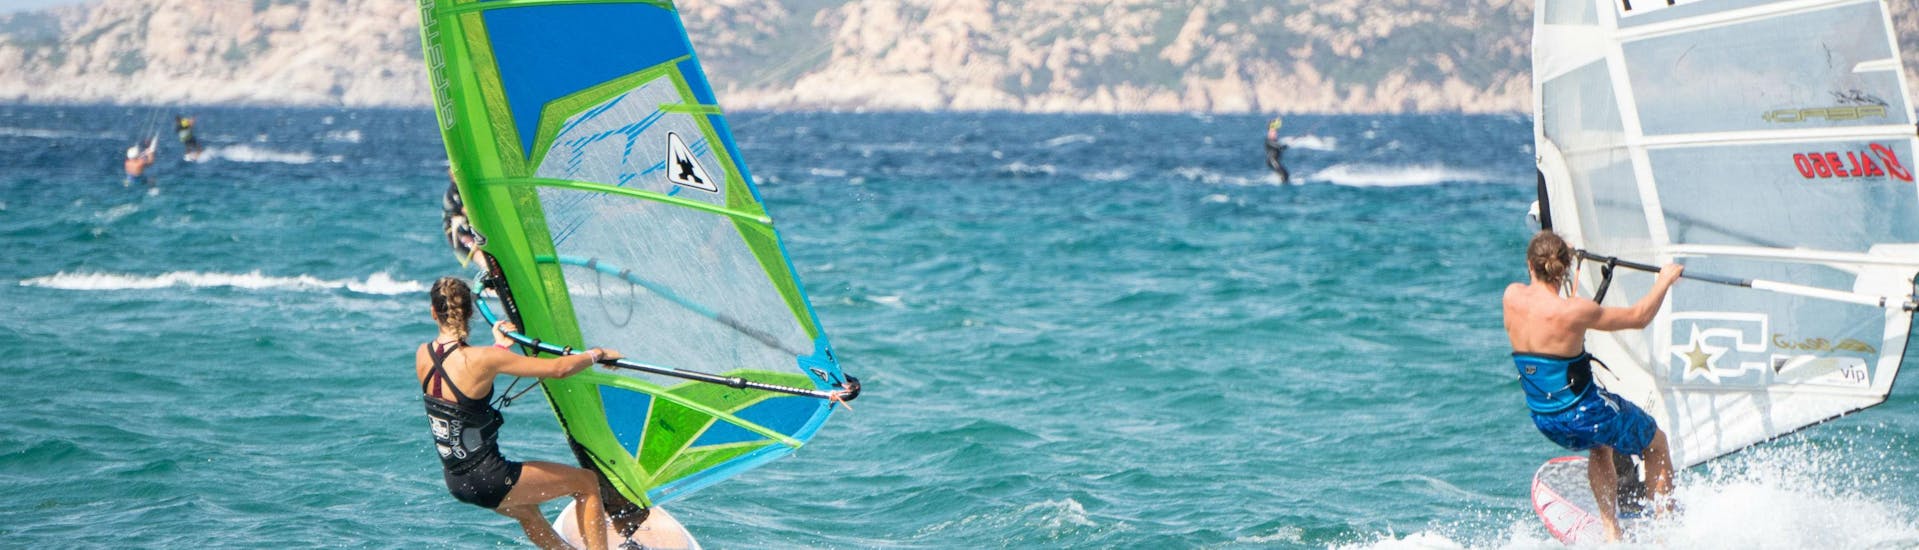 Private Windsurfing Lessons - All Levels         with FH Academy Sardinia - Hero image